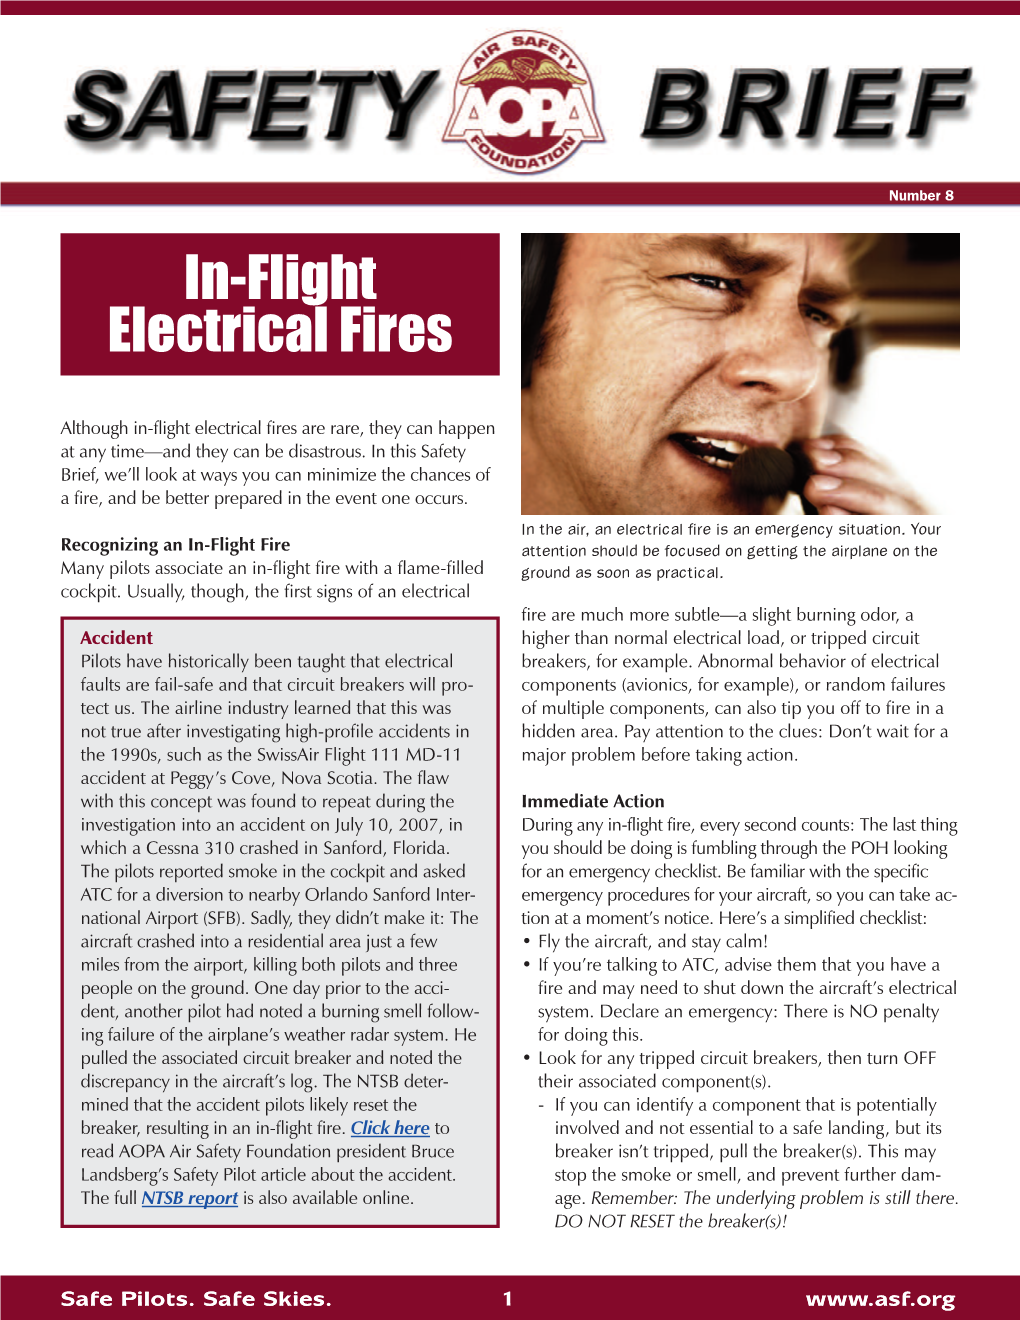 In-Flight Electrical Fires